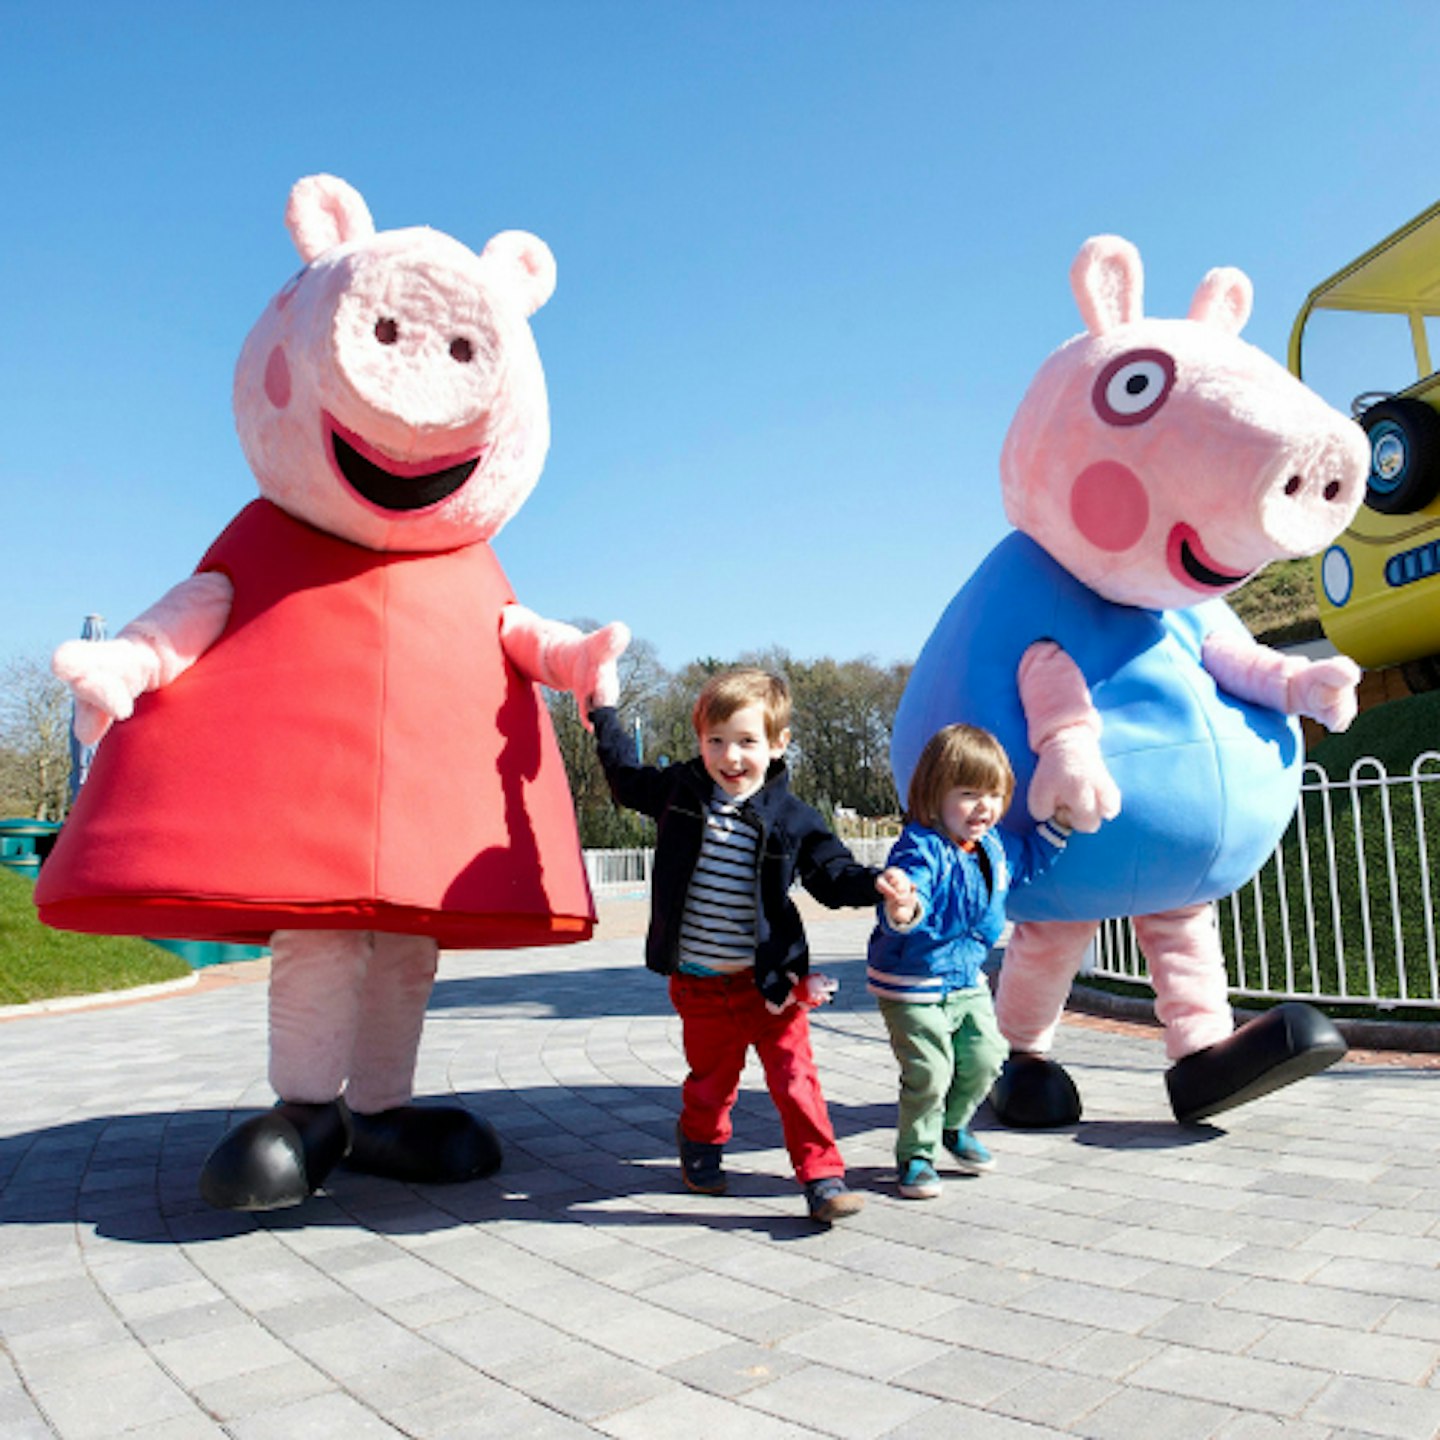 Peppa Pig World deals and offers for 2021